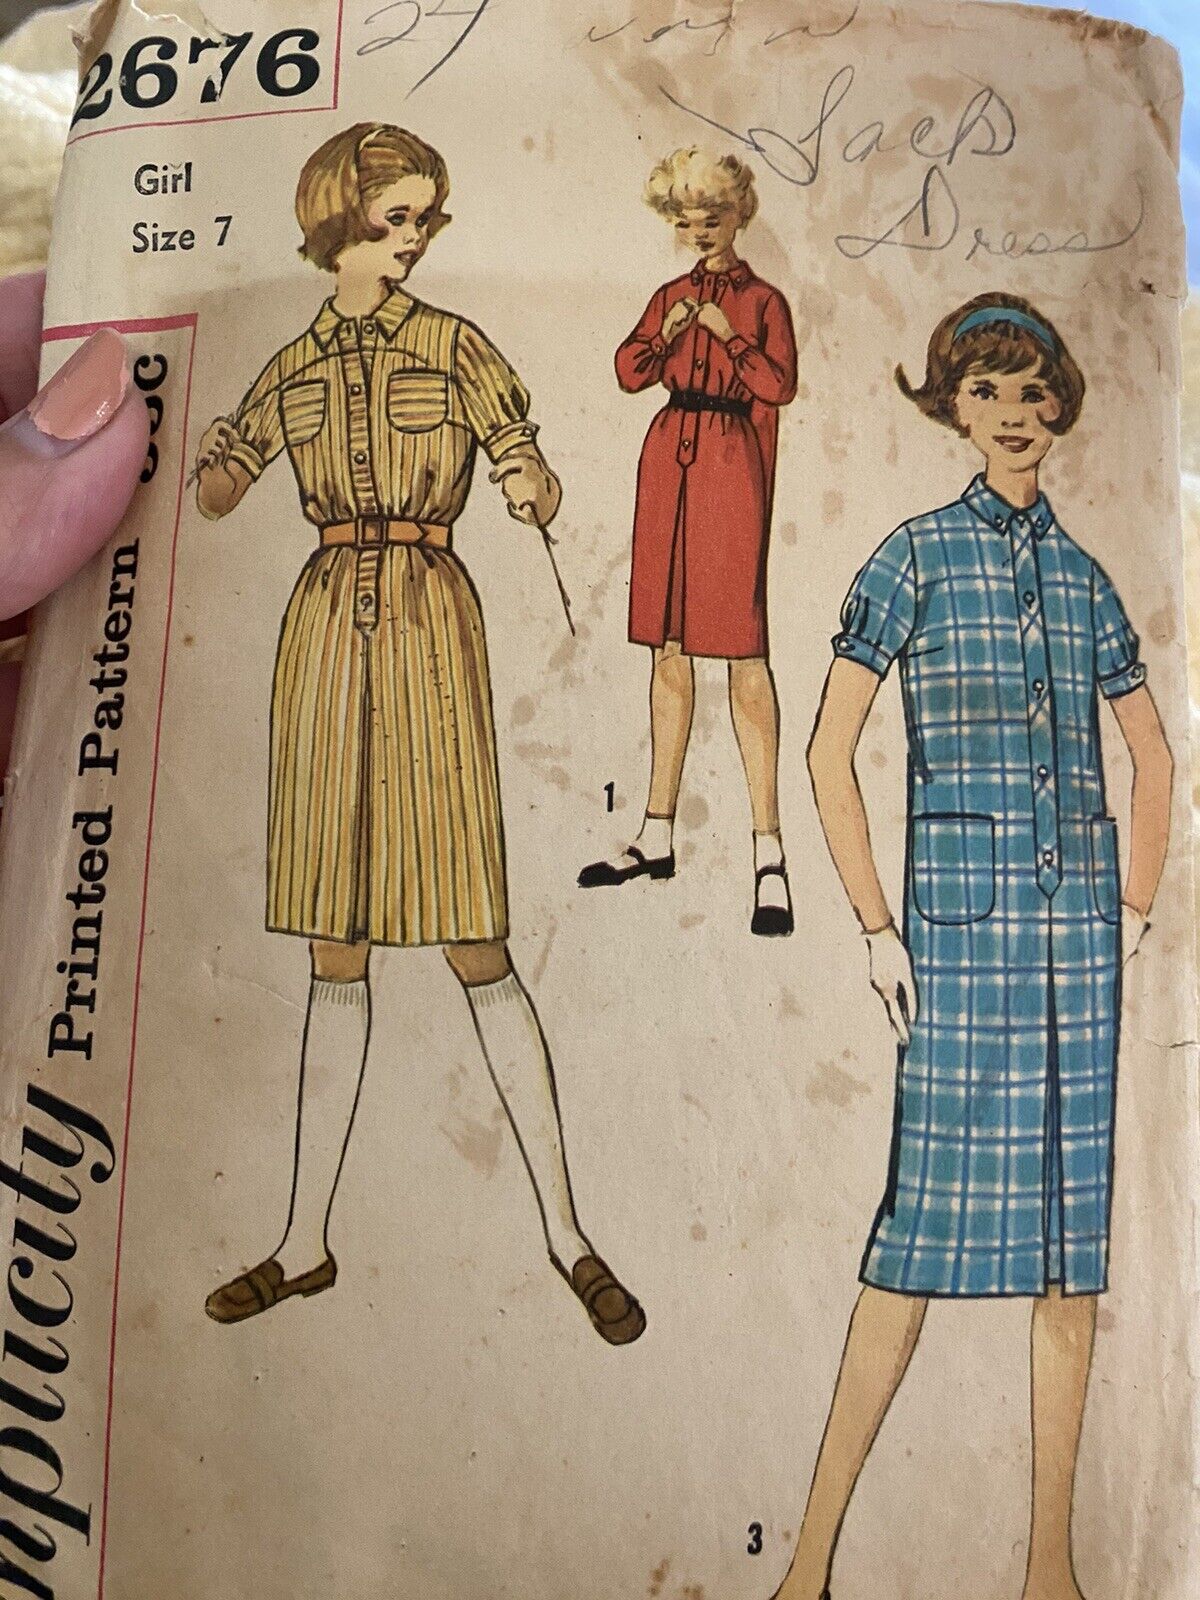 Vintage 1960’s Ladies Dress Pattern 2676 Size 7 Cut And Complete 